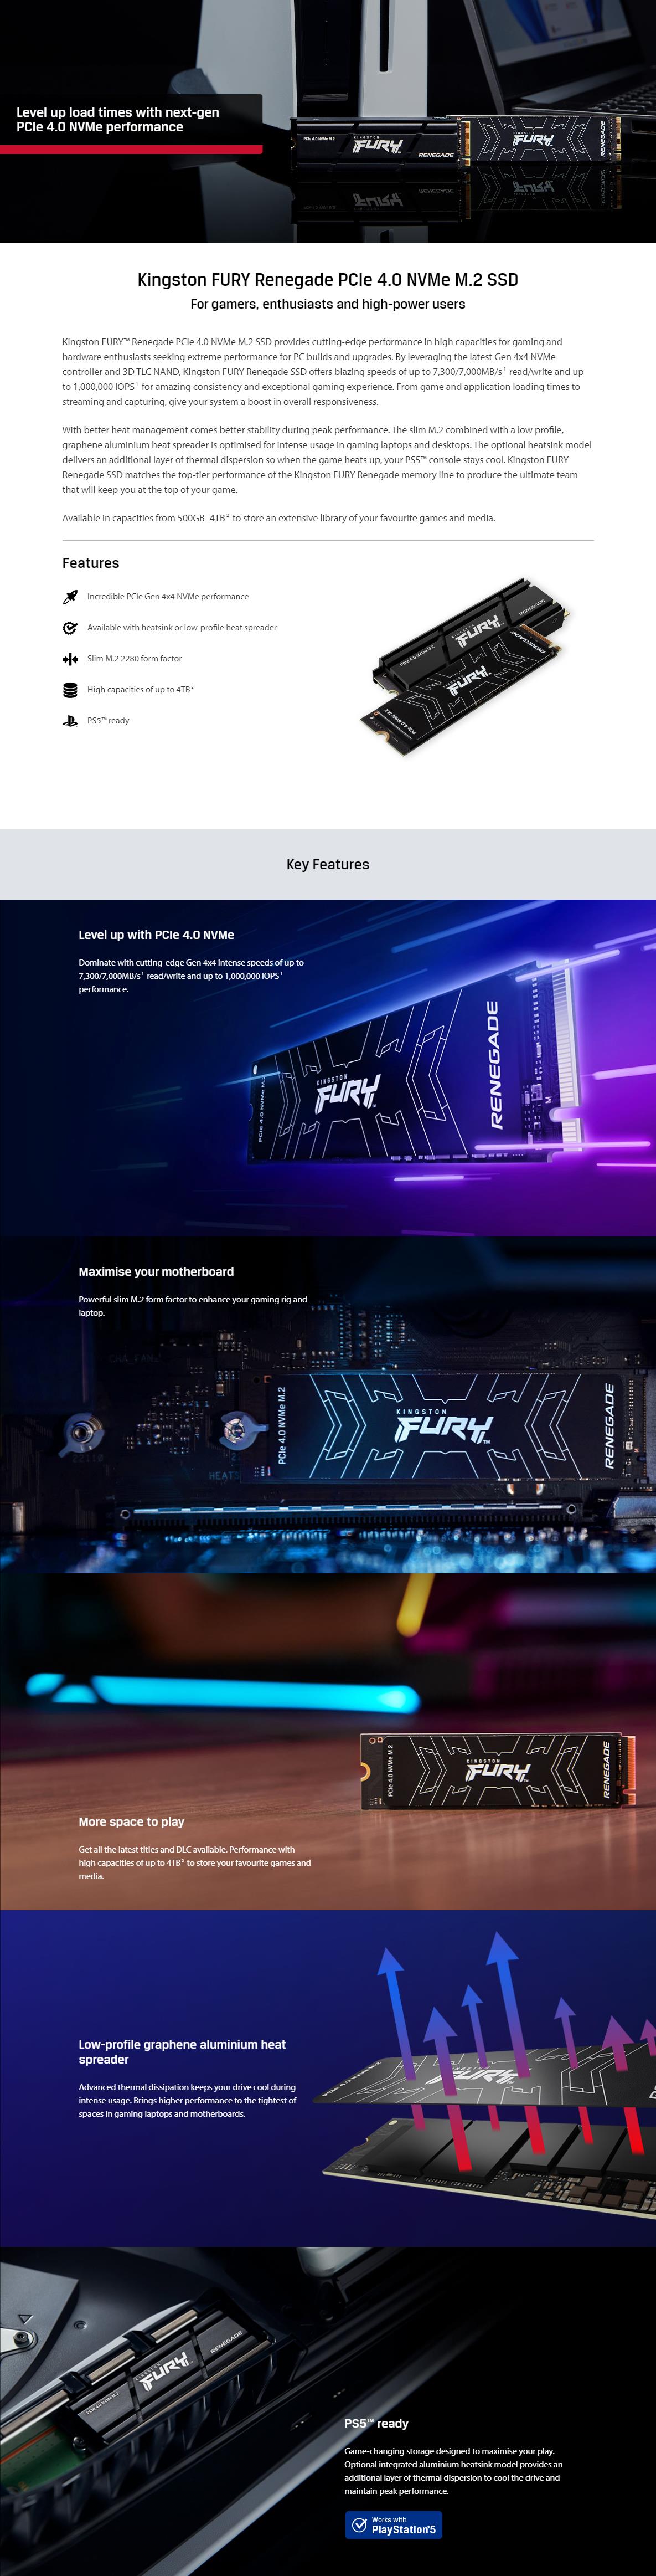 A large marketing image providing additional information about the product Kingston FURY Renegade w/Heatsink PCIe Gen4 NVMe M.2 SSD - 500GB - Additional alt info not provided